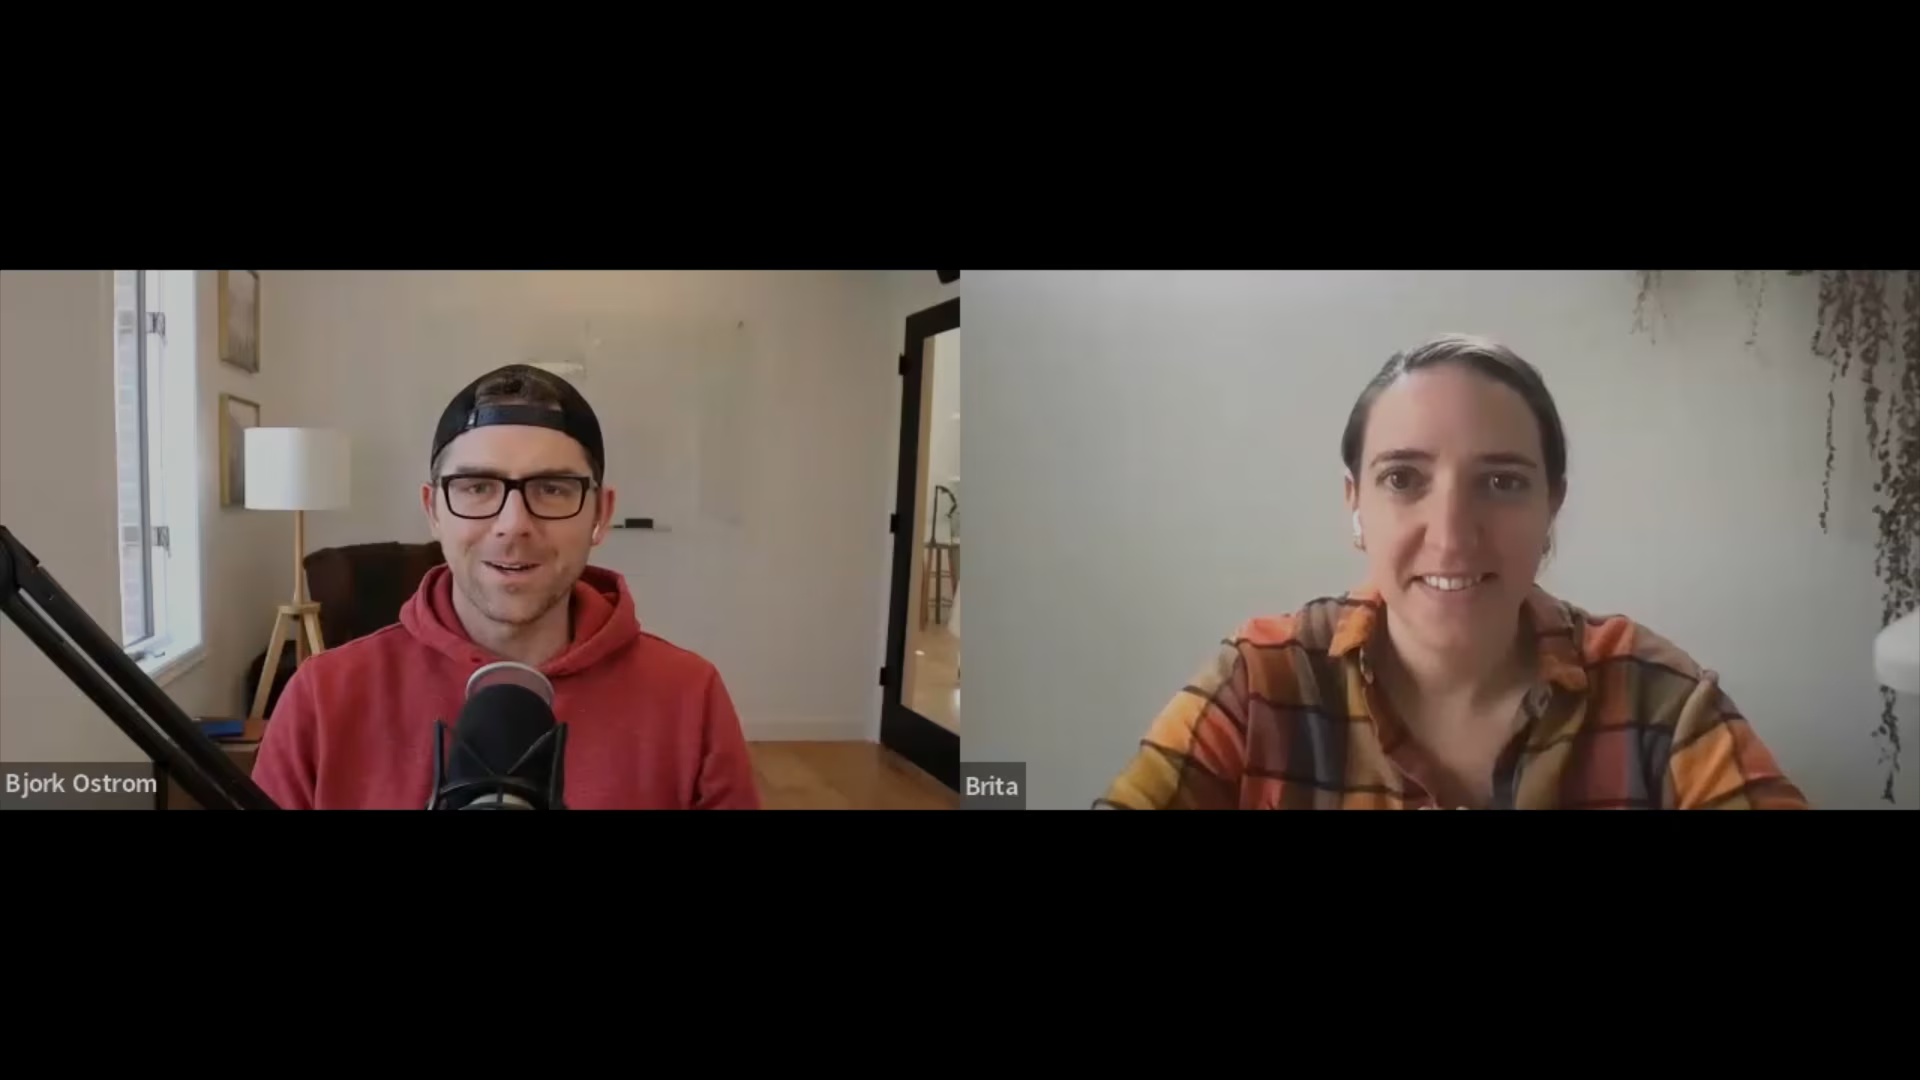 Zoom call with Bjork Ostrom and Brita Britnell